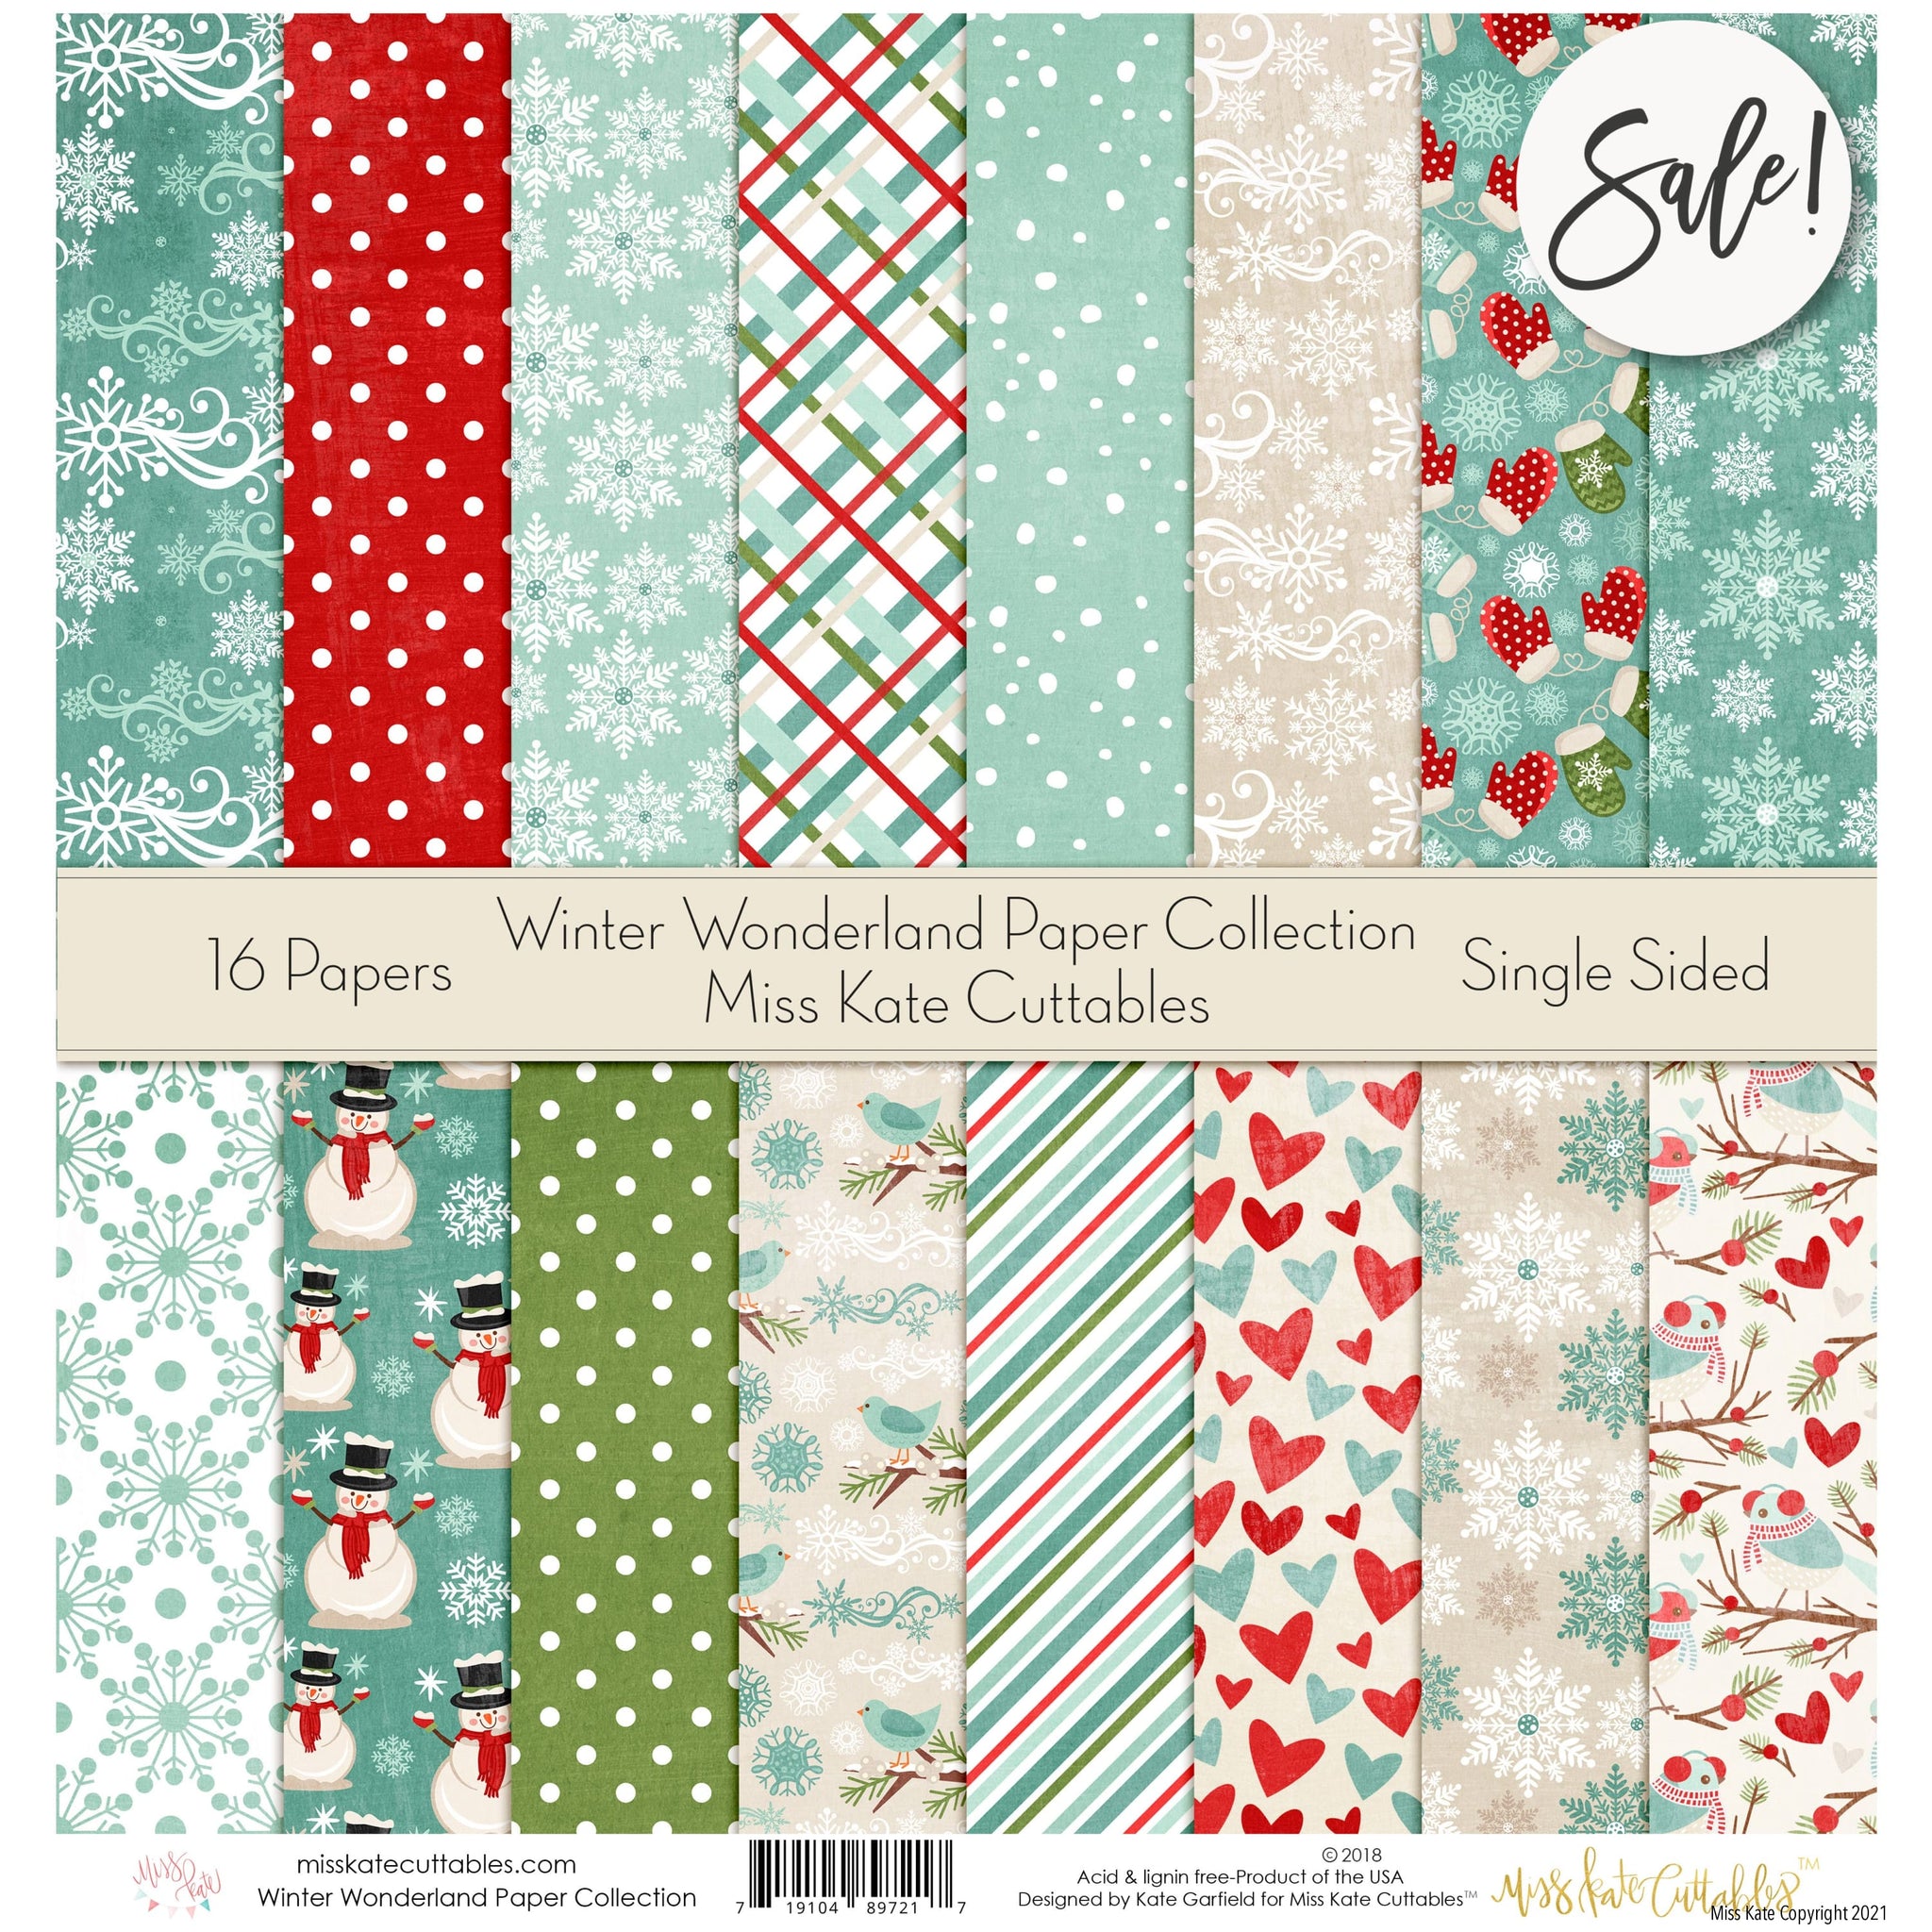 Winter Scenes Scrapbook Paper: 20 Double-Sided Sheets of Christmas Wintry  Scenes for Scrapbooking, Junk Journals, Card Making, Decoupage, Origami